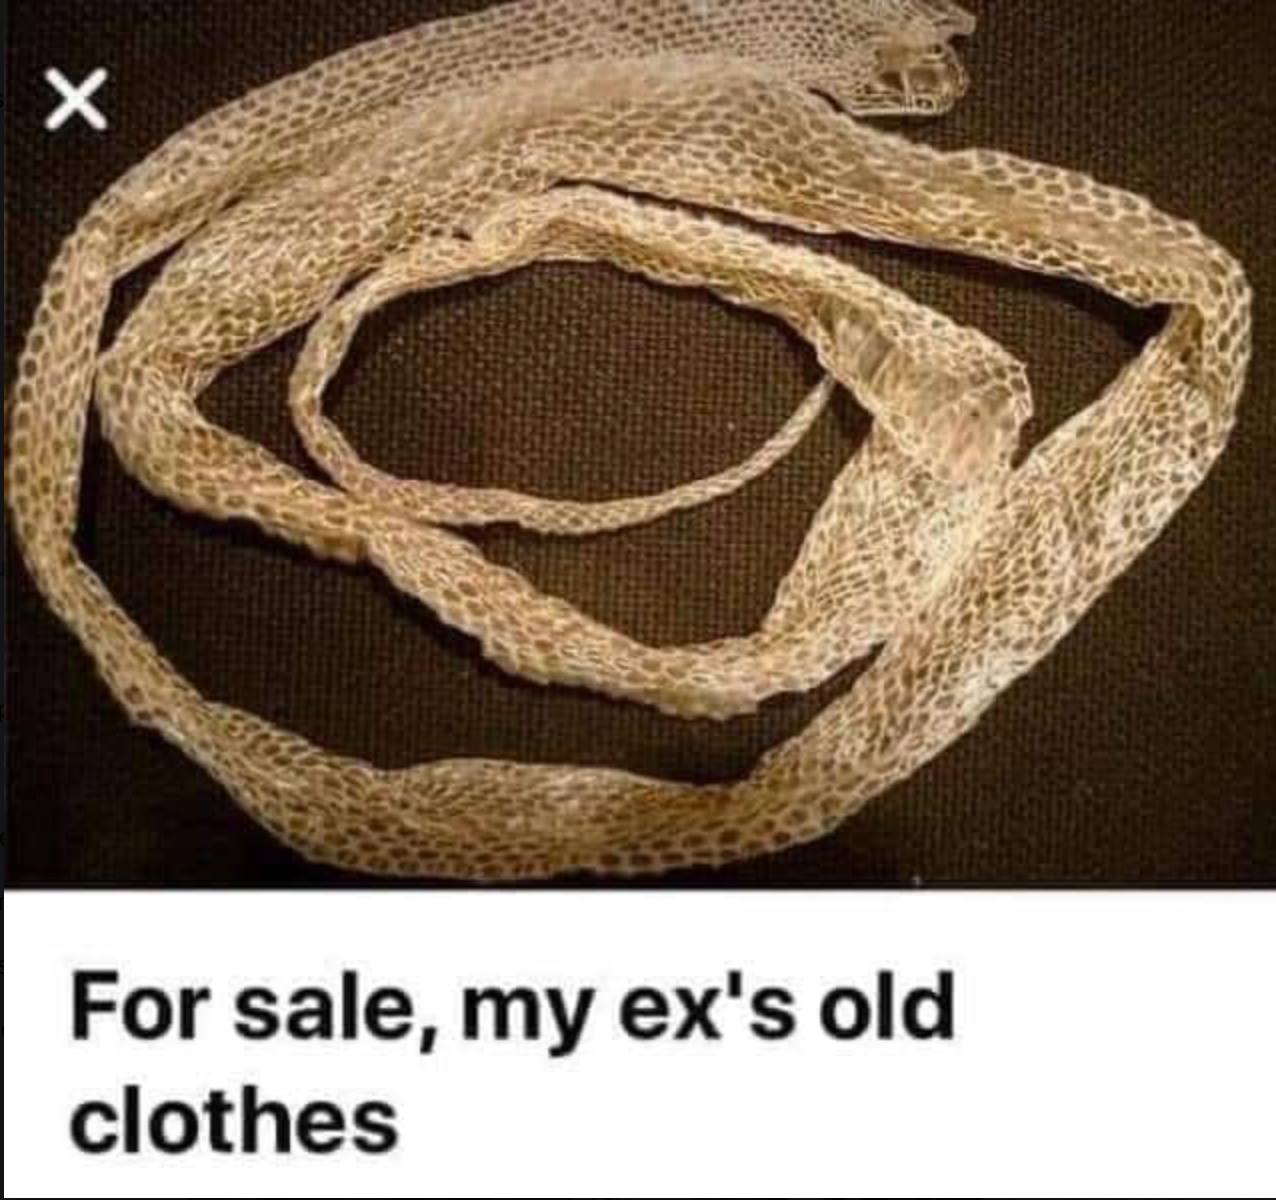 snake shedding skin - X For sale, my ex's old clothes